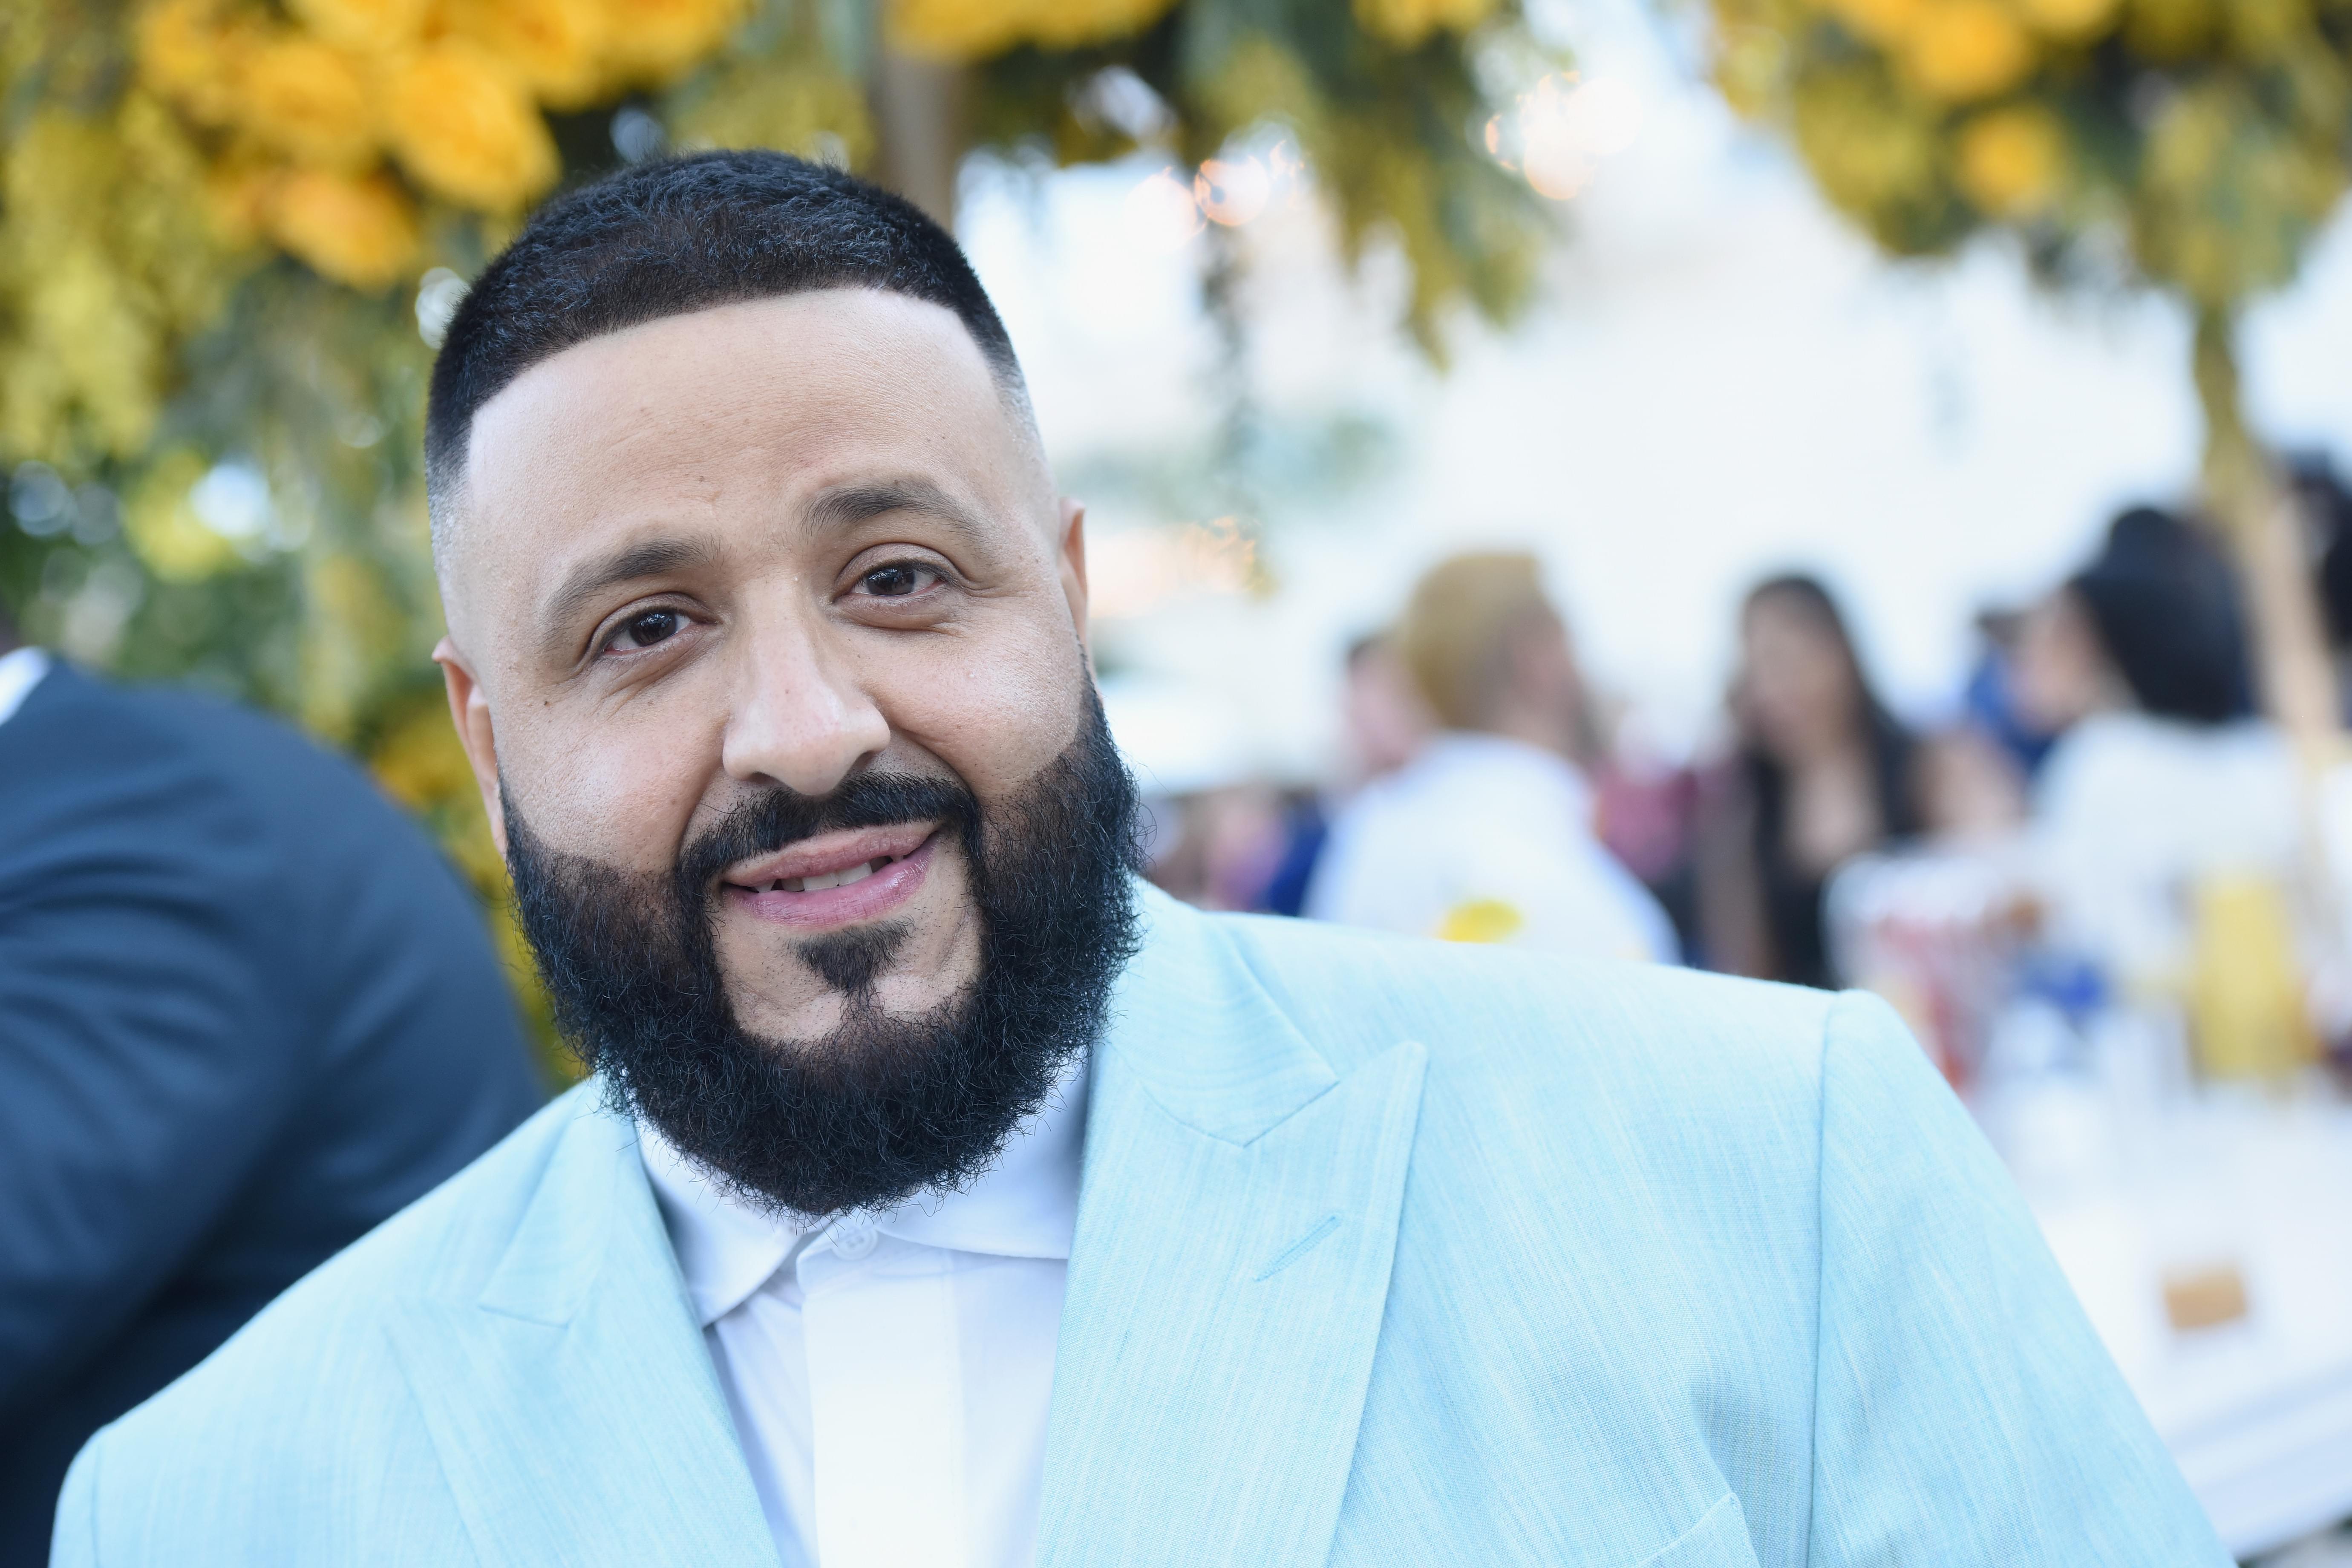 DJ Khaled Announces “Father of Asahd” is Almost Here [WATCH]